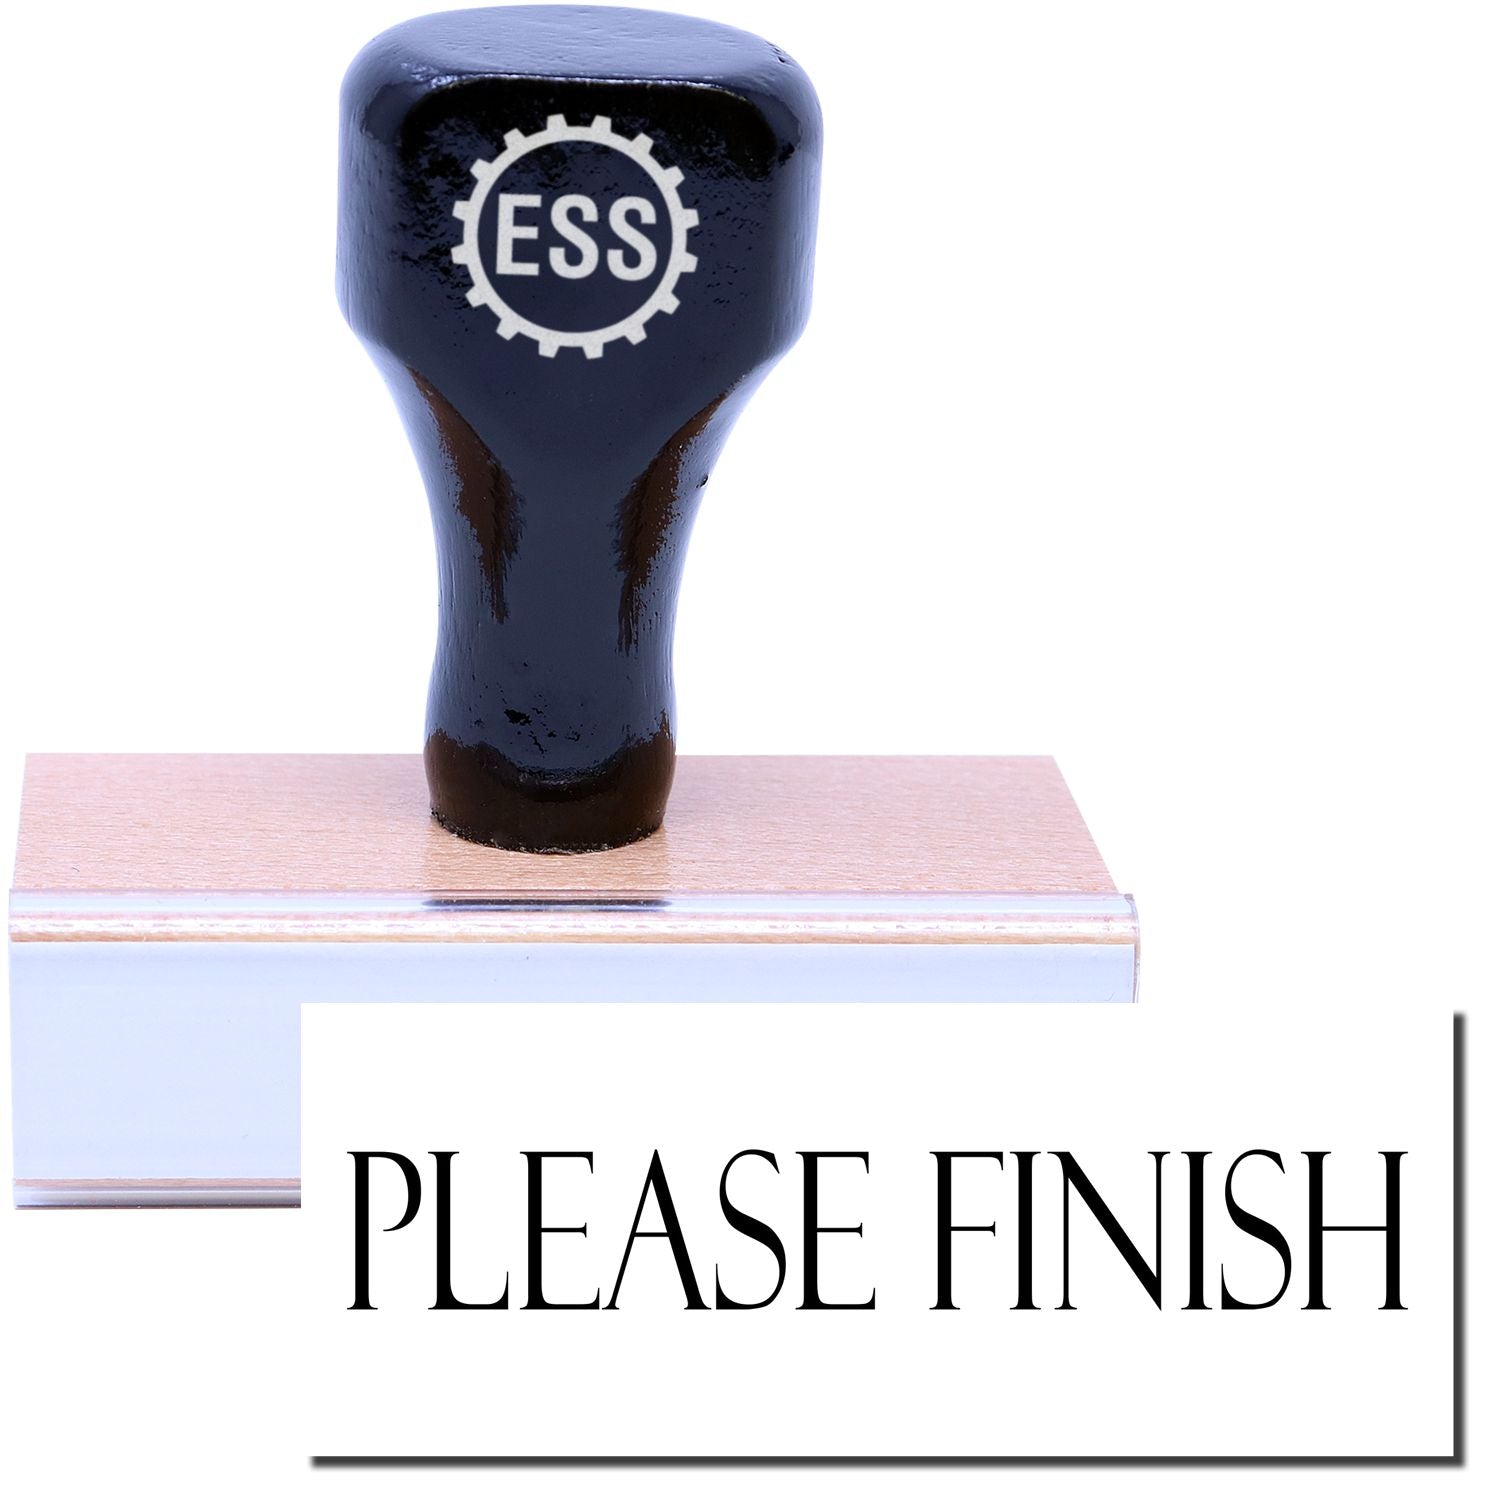 A stock office rubber stamp with a stamped image showing how the text "PLEASE FINISH" is displayed after stamping.